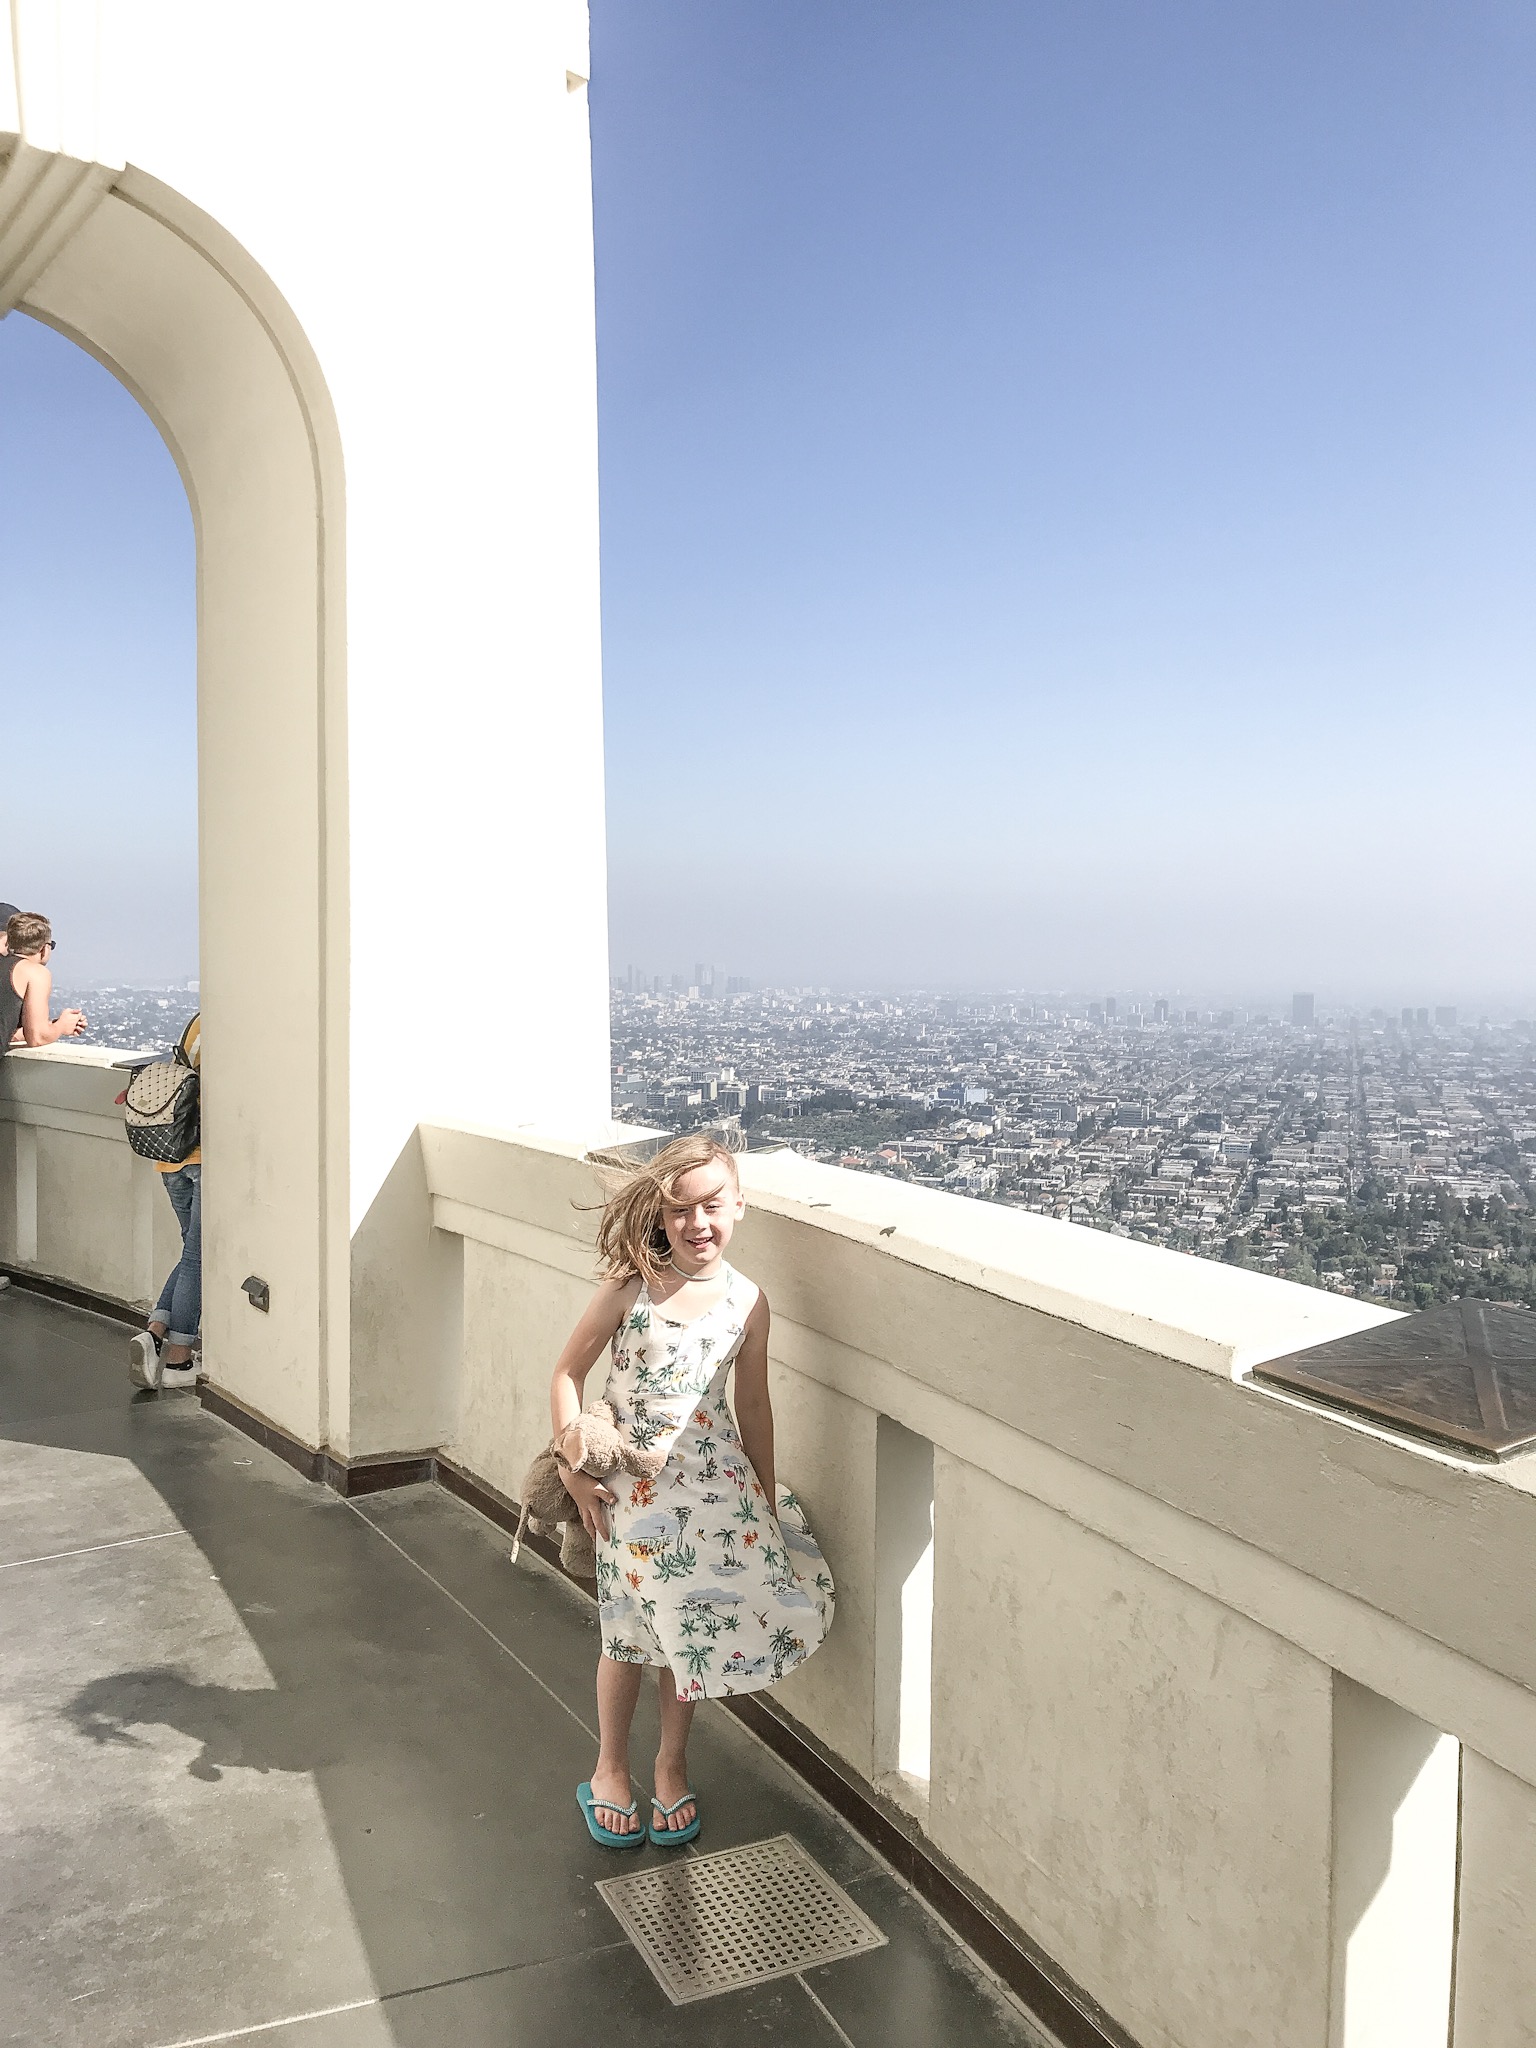 Having a Marilyn moment at Griffith Observatory.